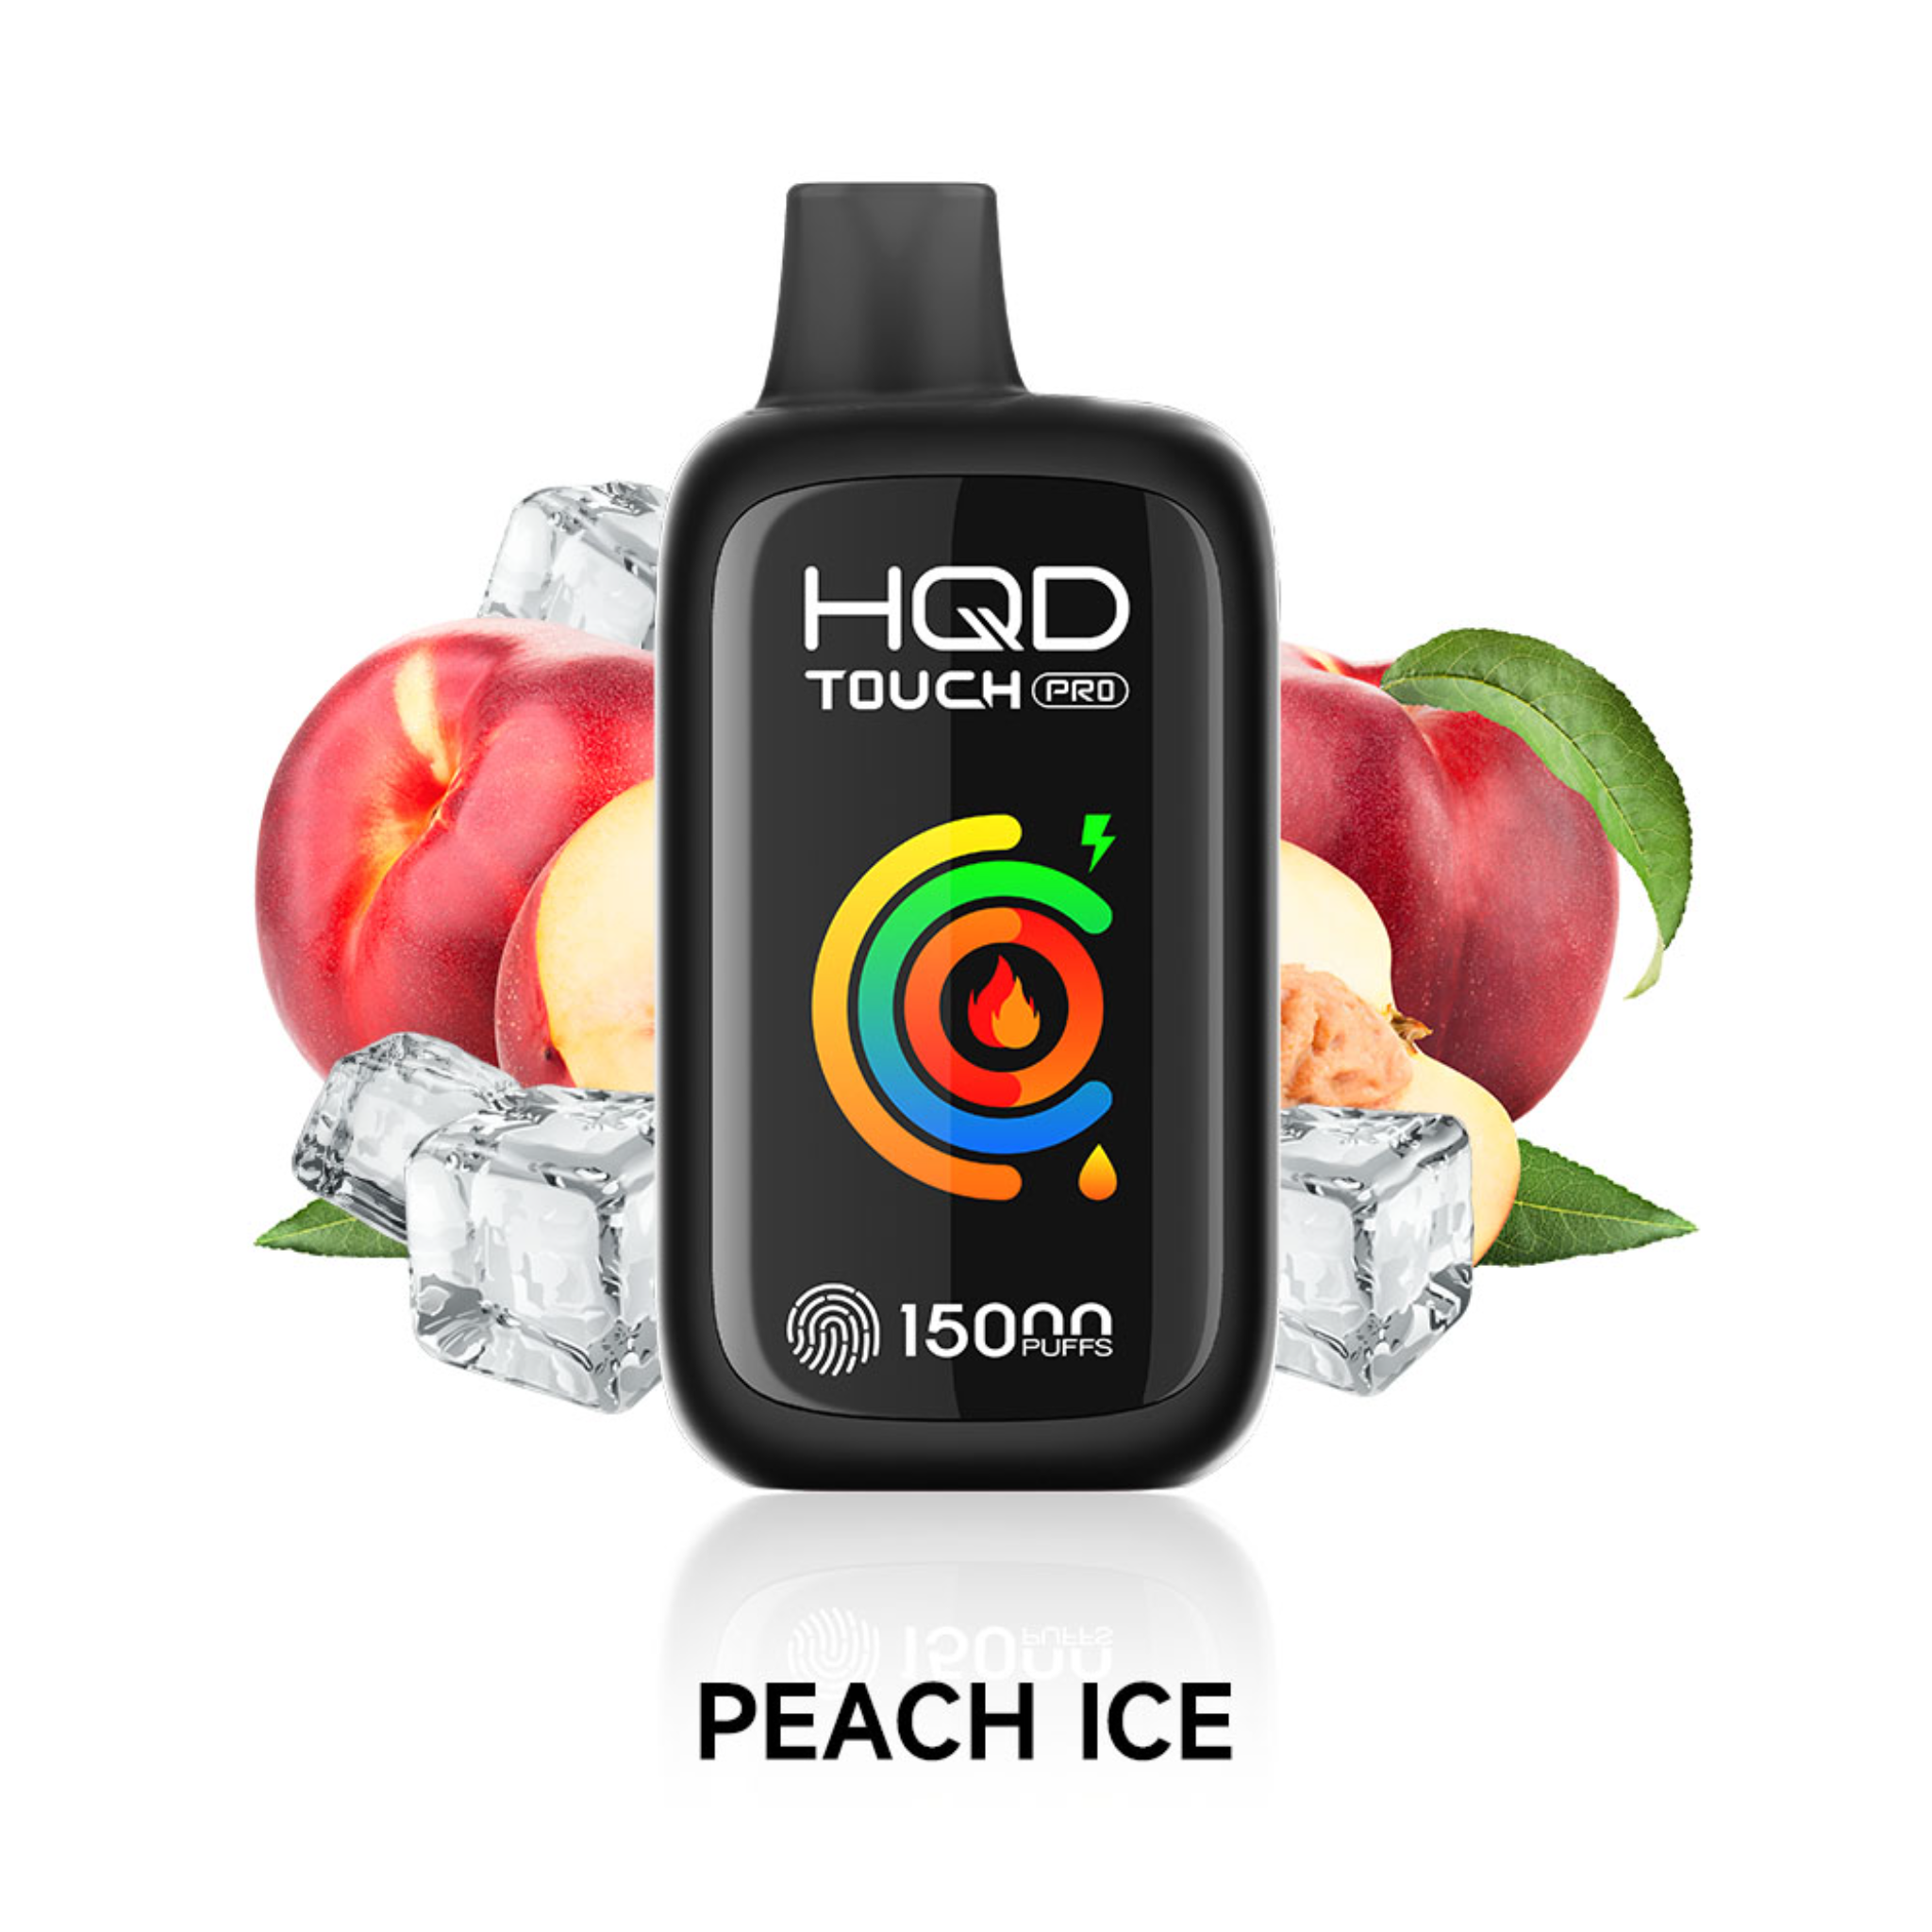 HQD TOUCH PRO - (15000 PUFFs) DISPOSABLE